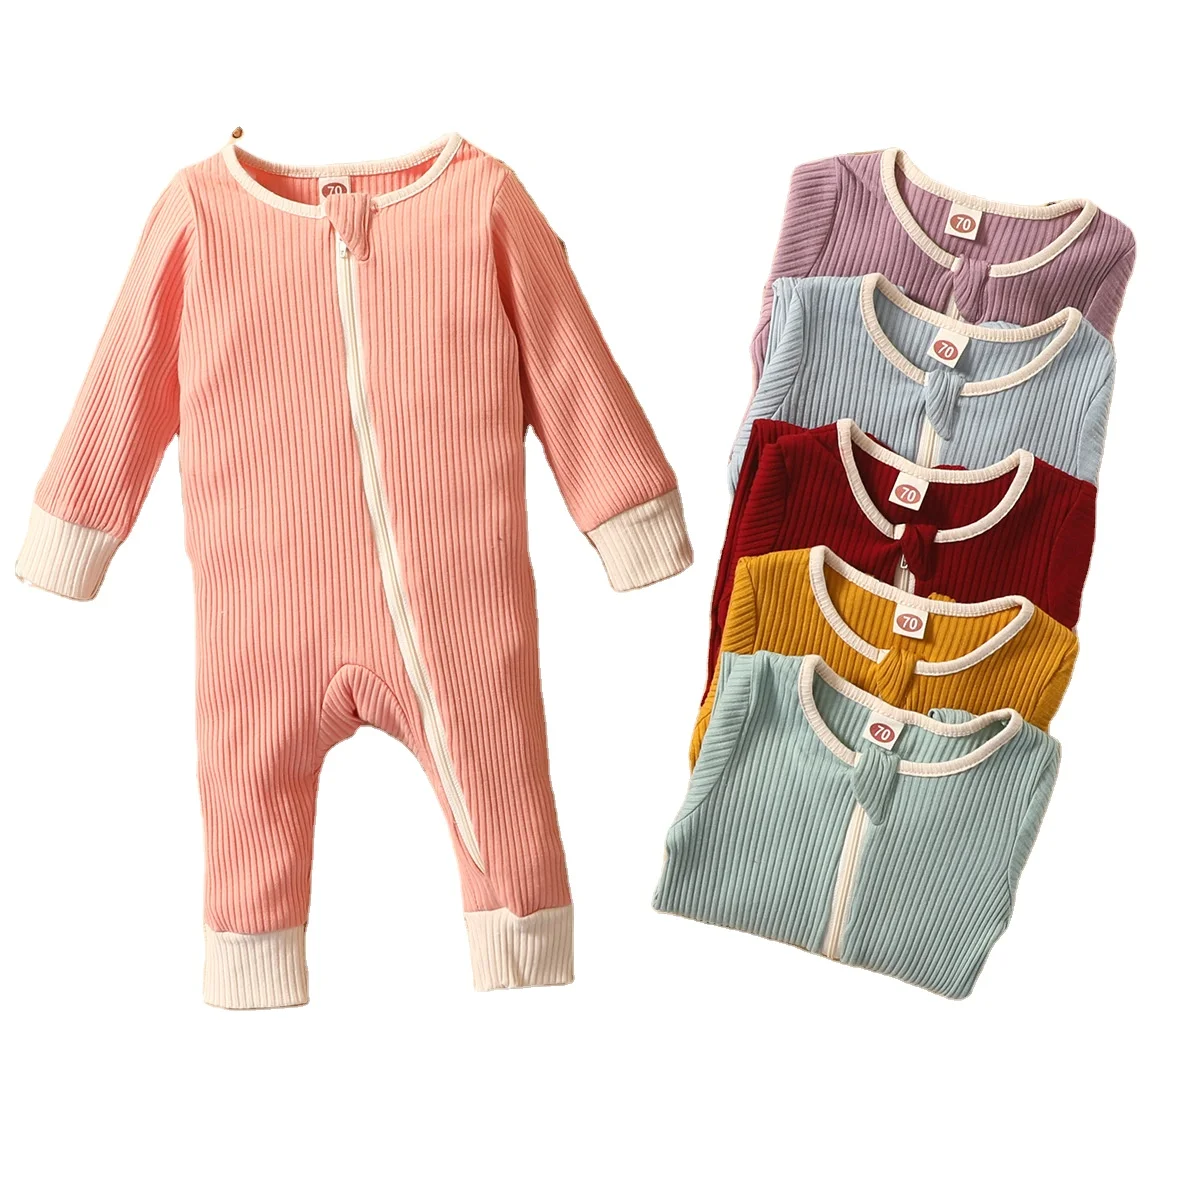 

Solid color baby girls' and boy's rompers infants long sleeves jumpsuits toddlers cotton bodysuits